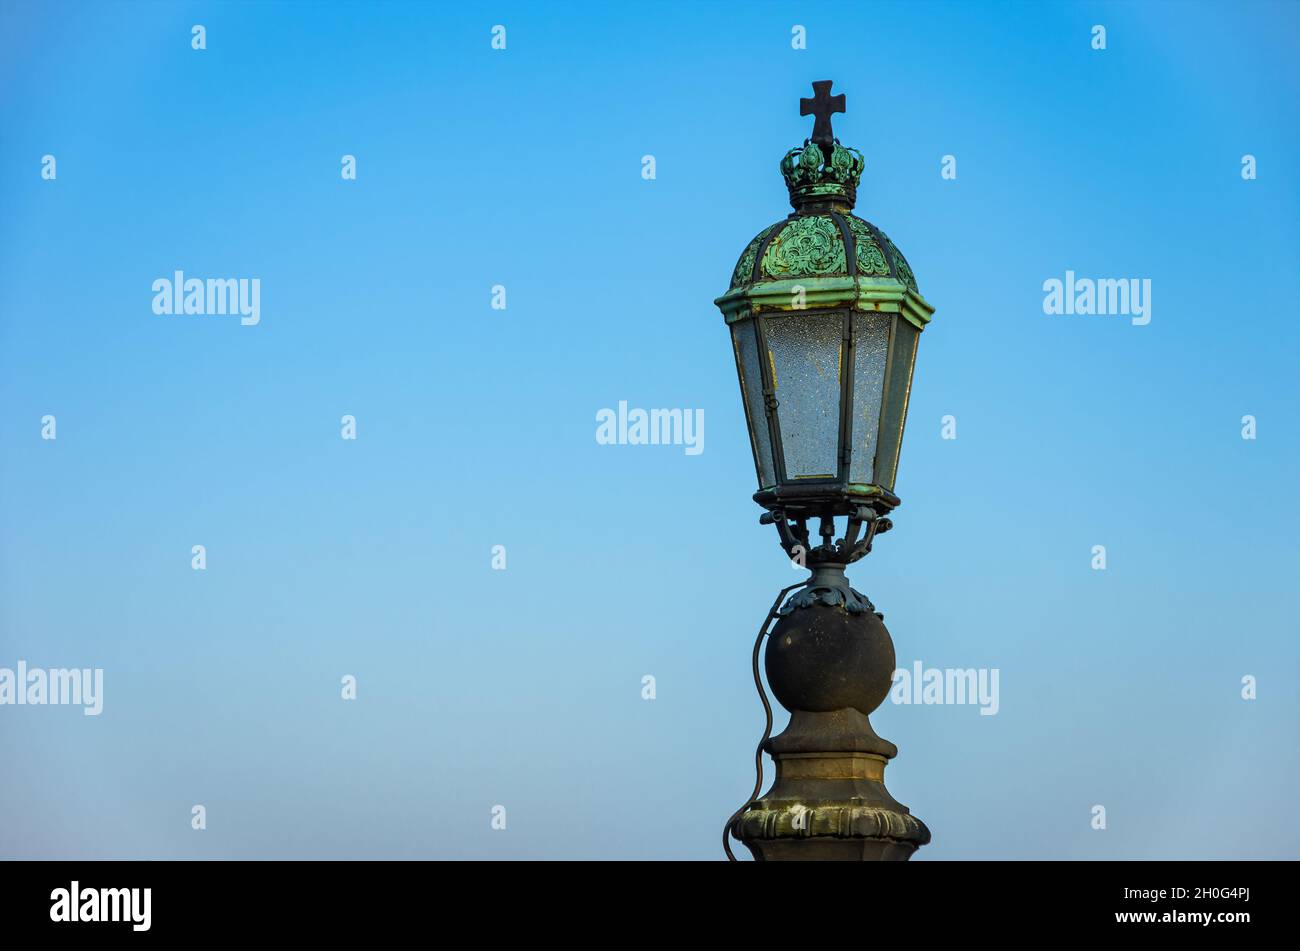 Old historical street lighting using the example of a street lamp in front of the church of Moritzburg near Dresden, Saxony, Germany. Stock Photo